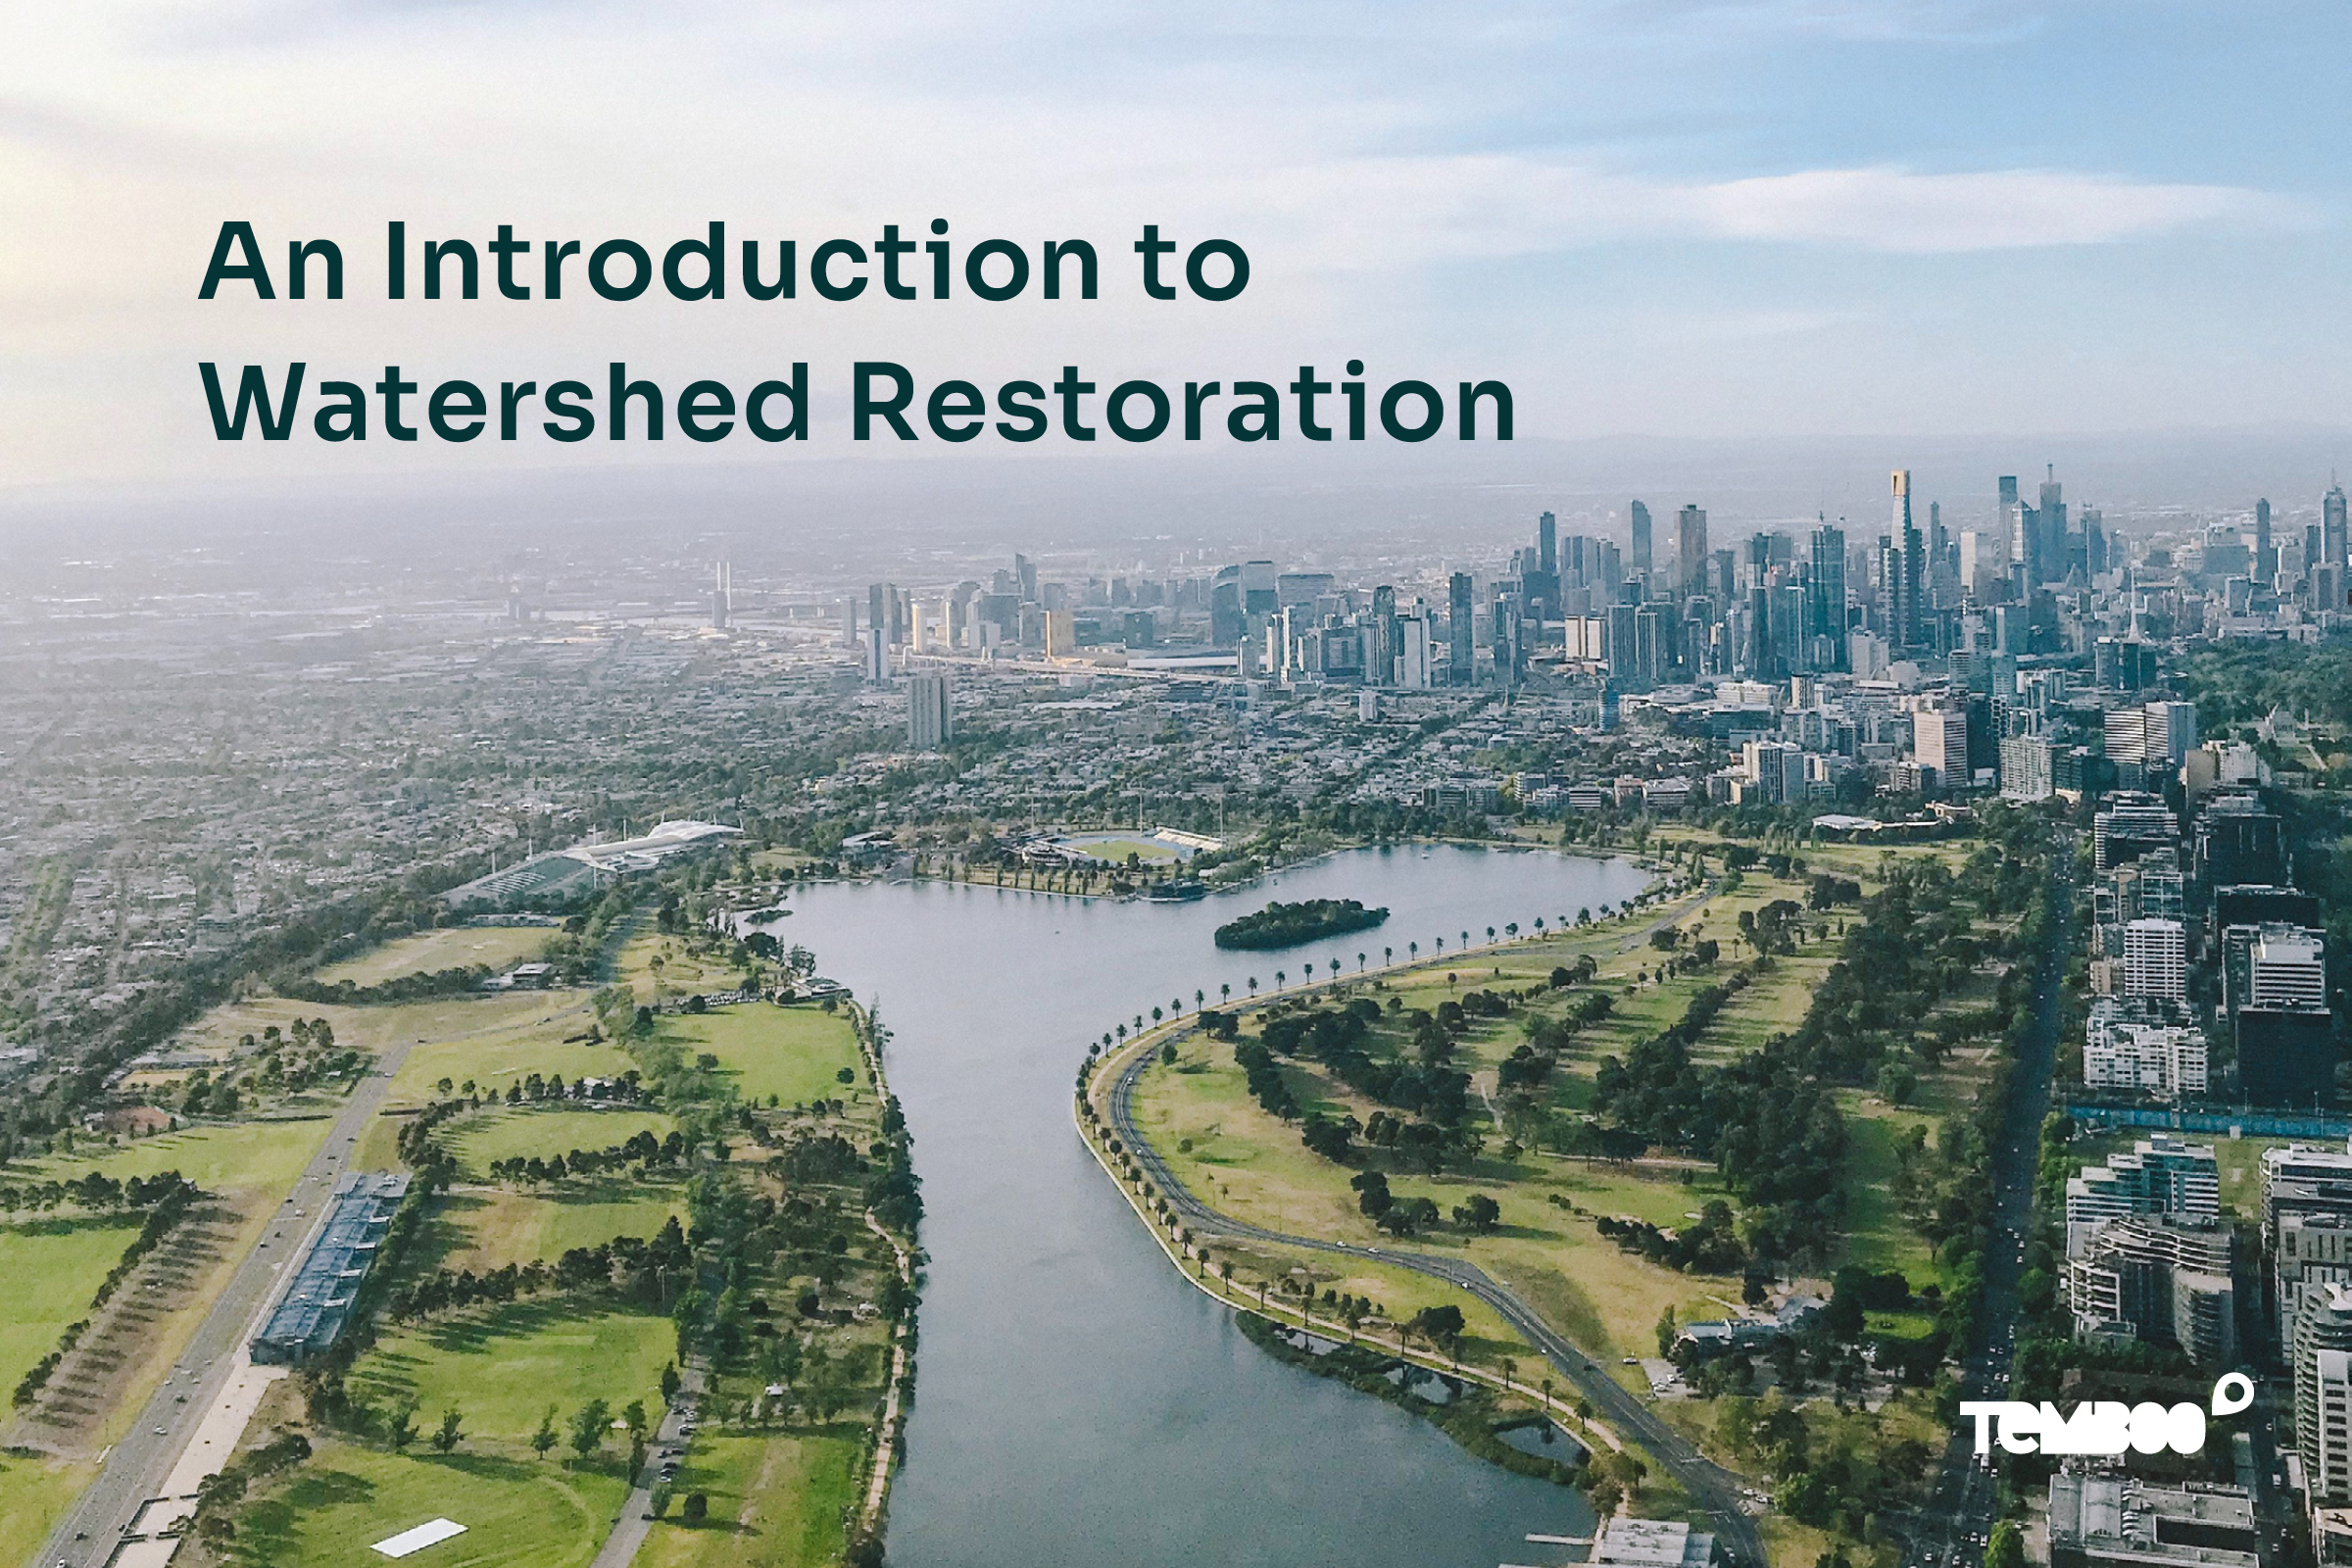 An Introduction to Watershed Restoration